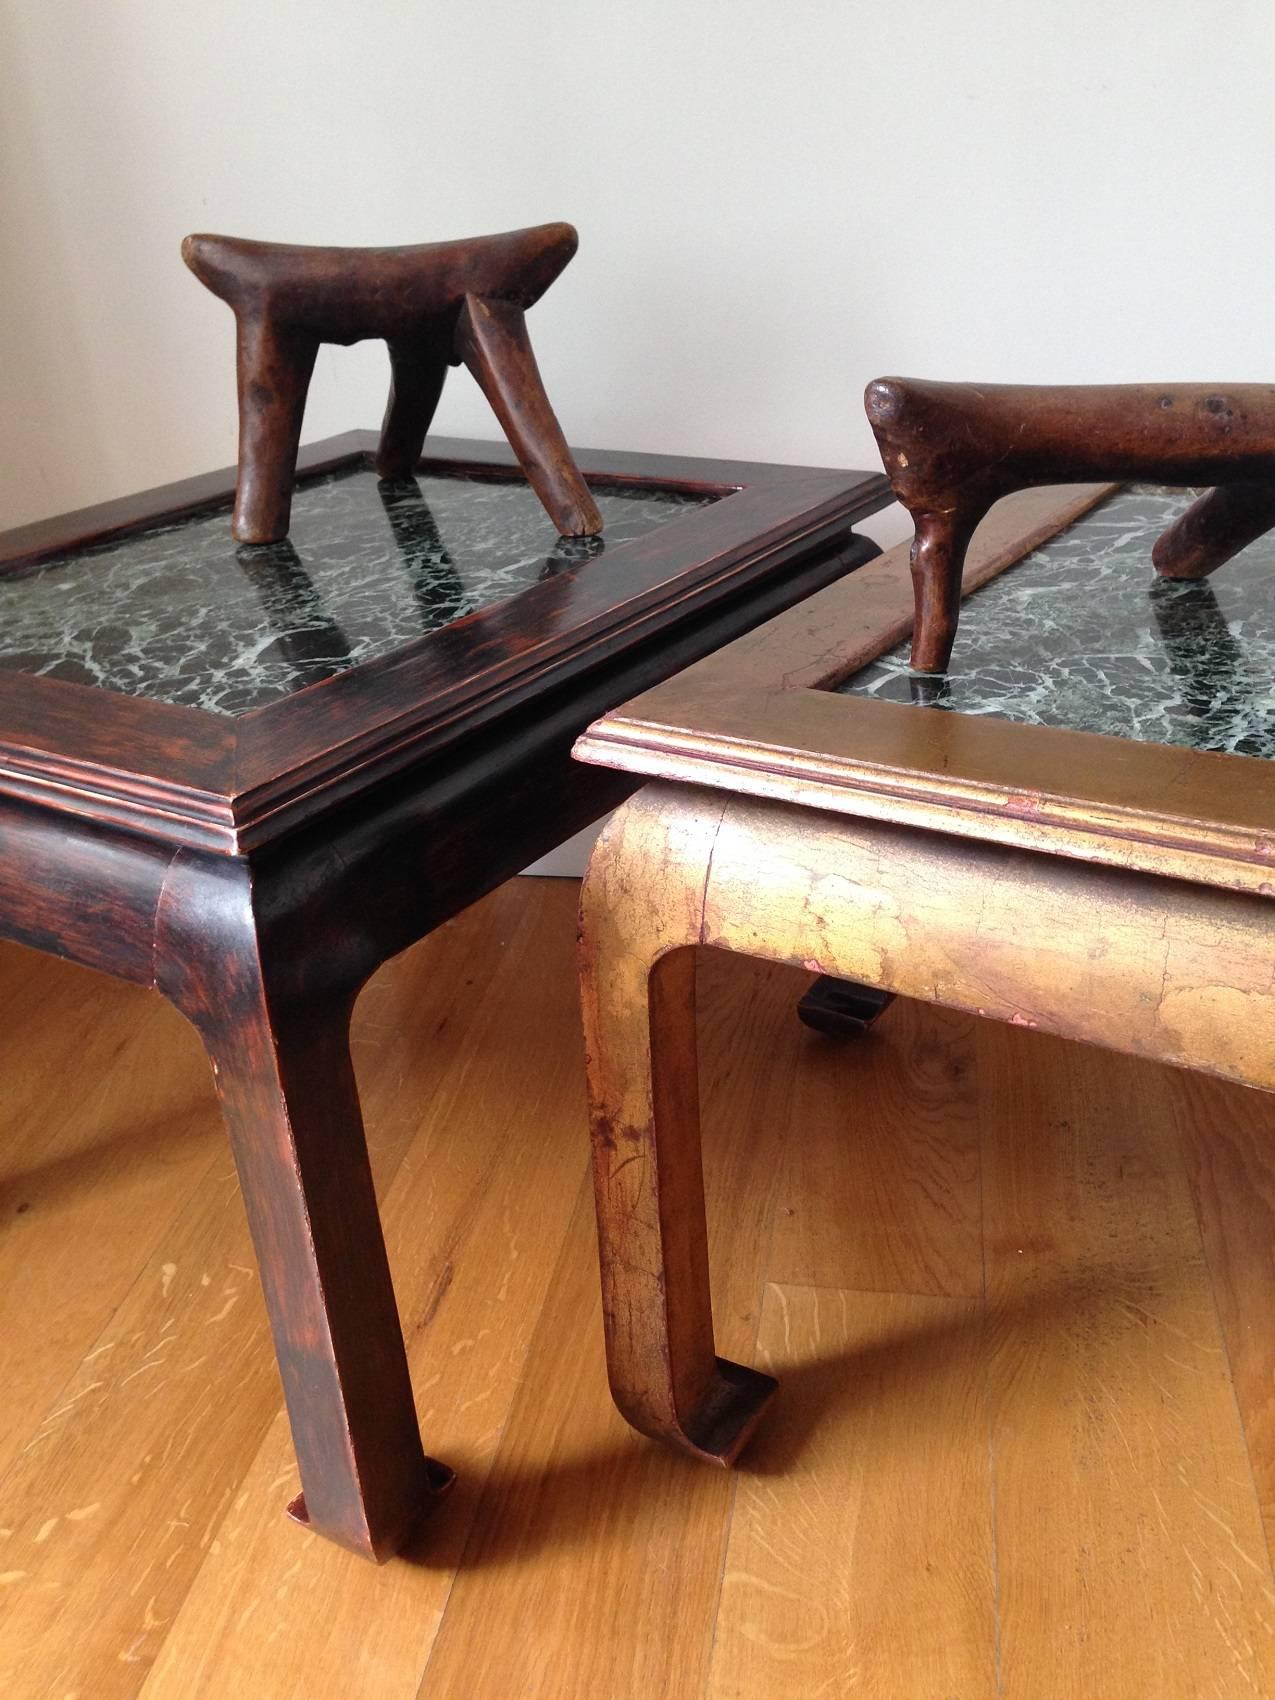 Pair of Laquered Wood and Marble Side Tables Bouts de Canape, French, circa 1940 In Fair Condition For Sale In London, GB